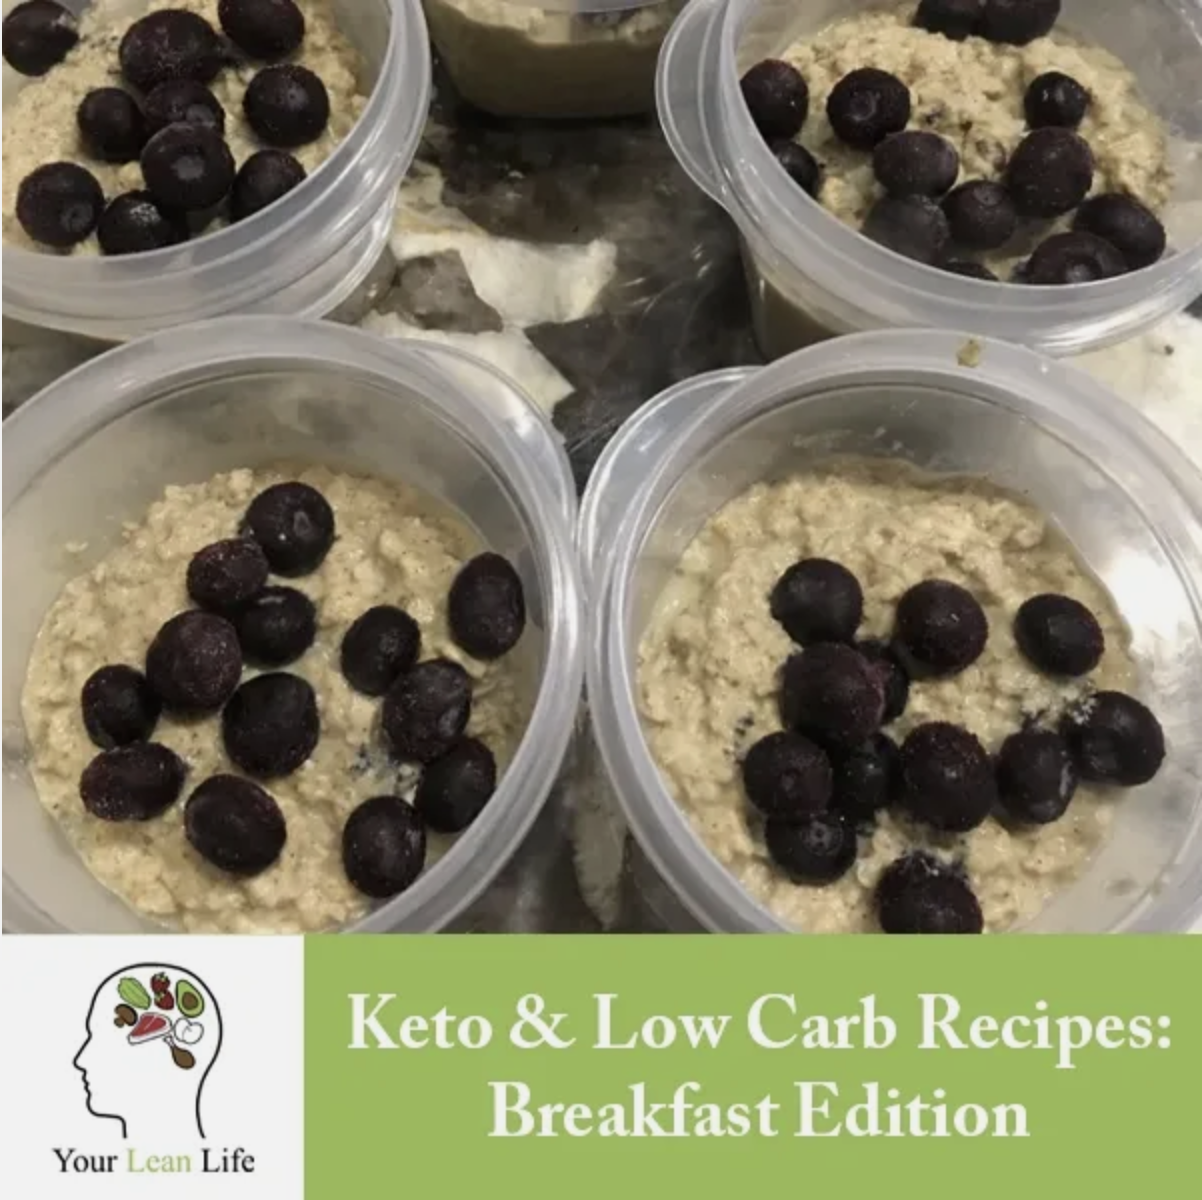 Keto & Low Carb Recipes: Breakfast Edition